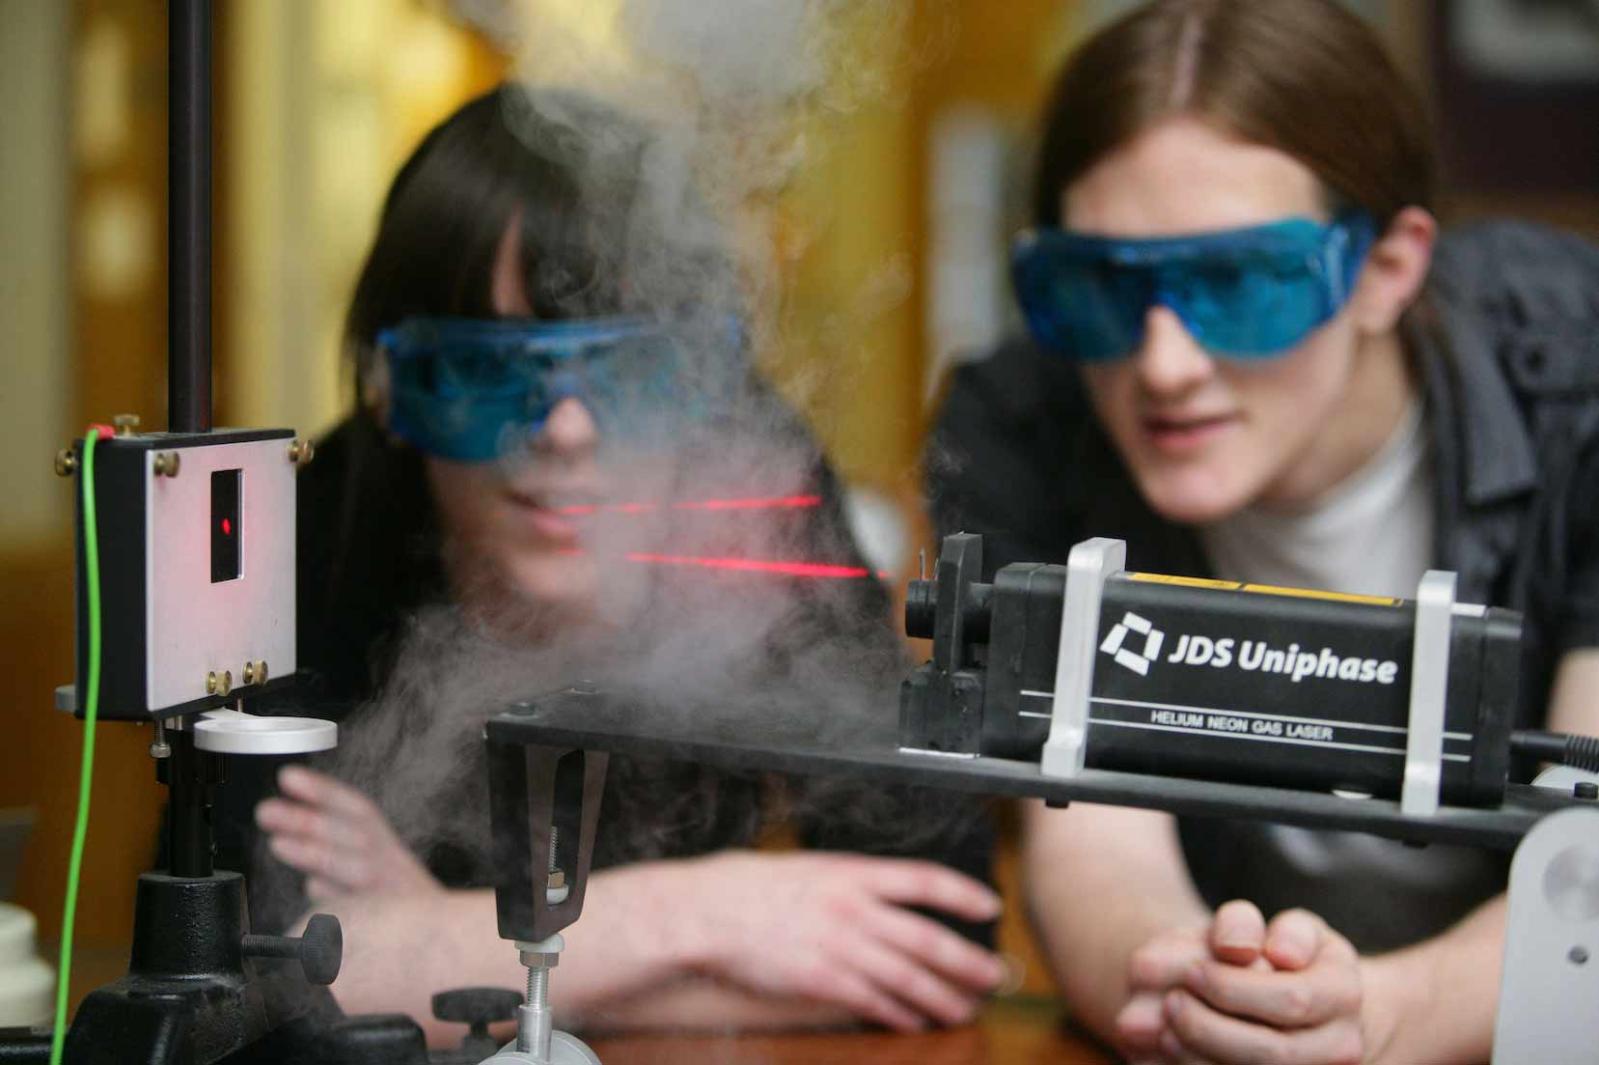 Students in a Lab experimenting with a Laser